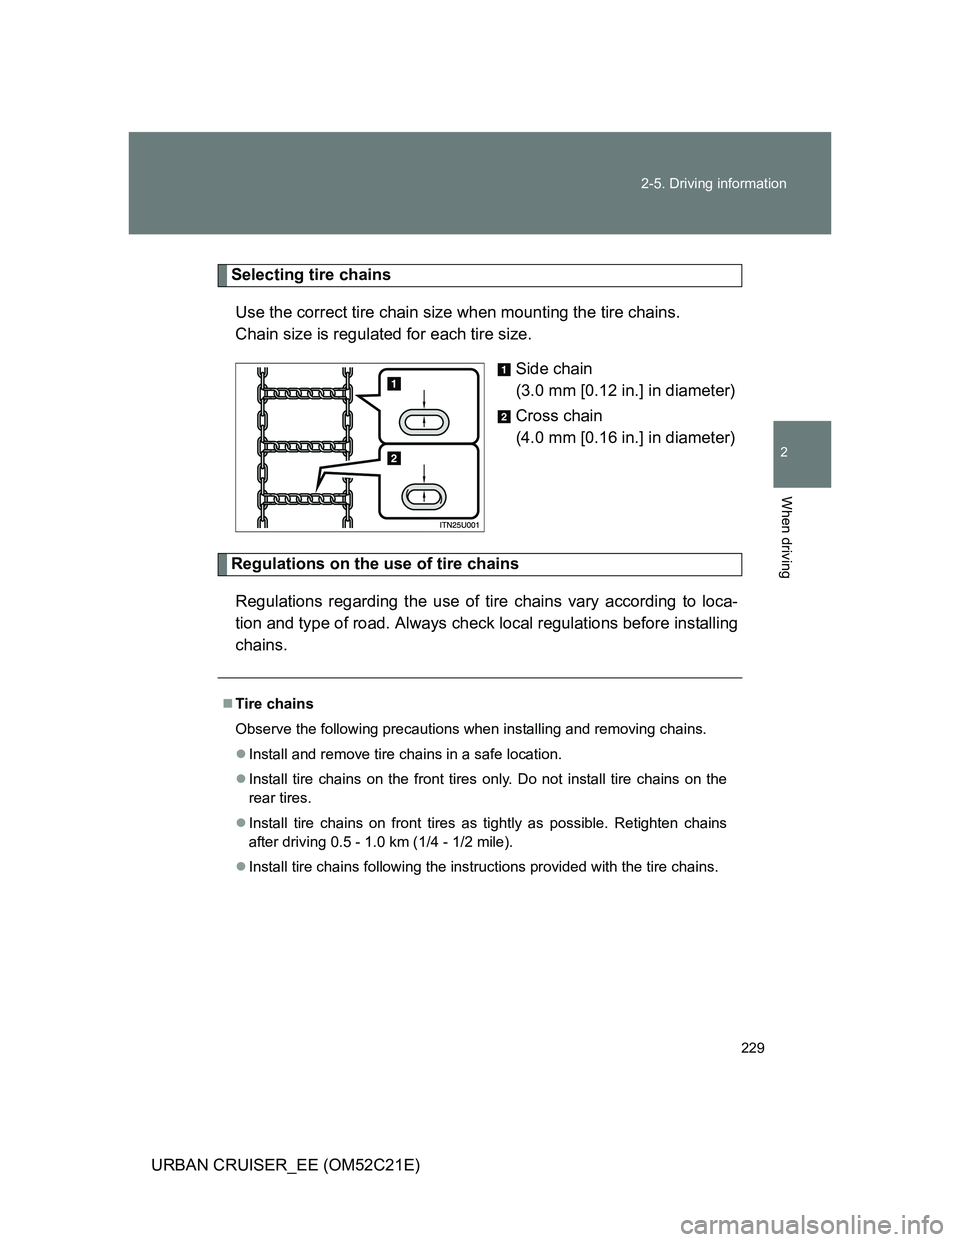 TOYOTA URBAN CRUISER 2011  Owners Manual 229 2-5. Driving information
2
When driving
URBAN CRUISER_EE (OM52C21E)
Selecting tire chains
Use the correct tire chain size when mounting the tire chains. 
Chain size is regulated for each tire size